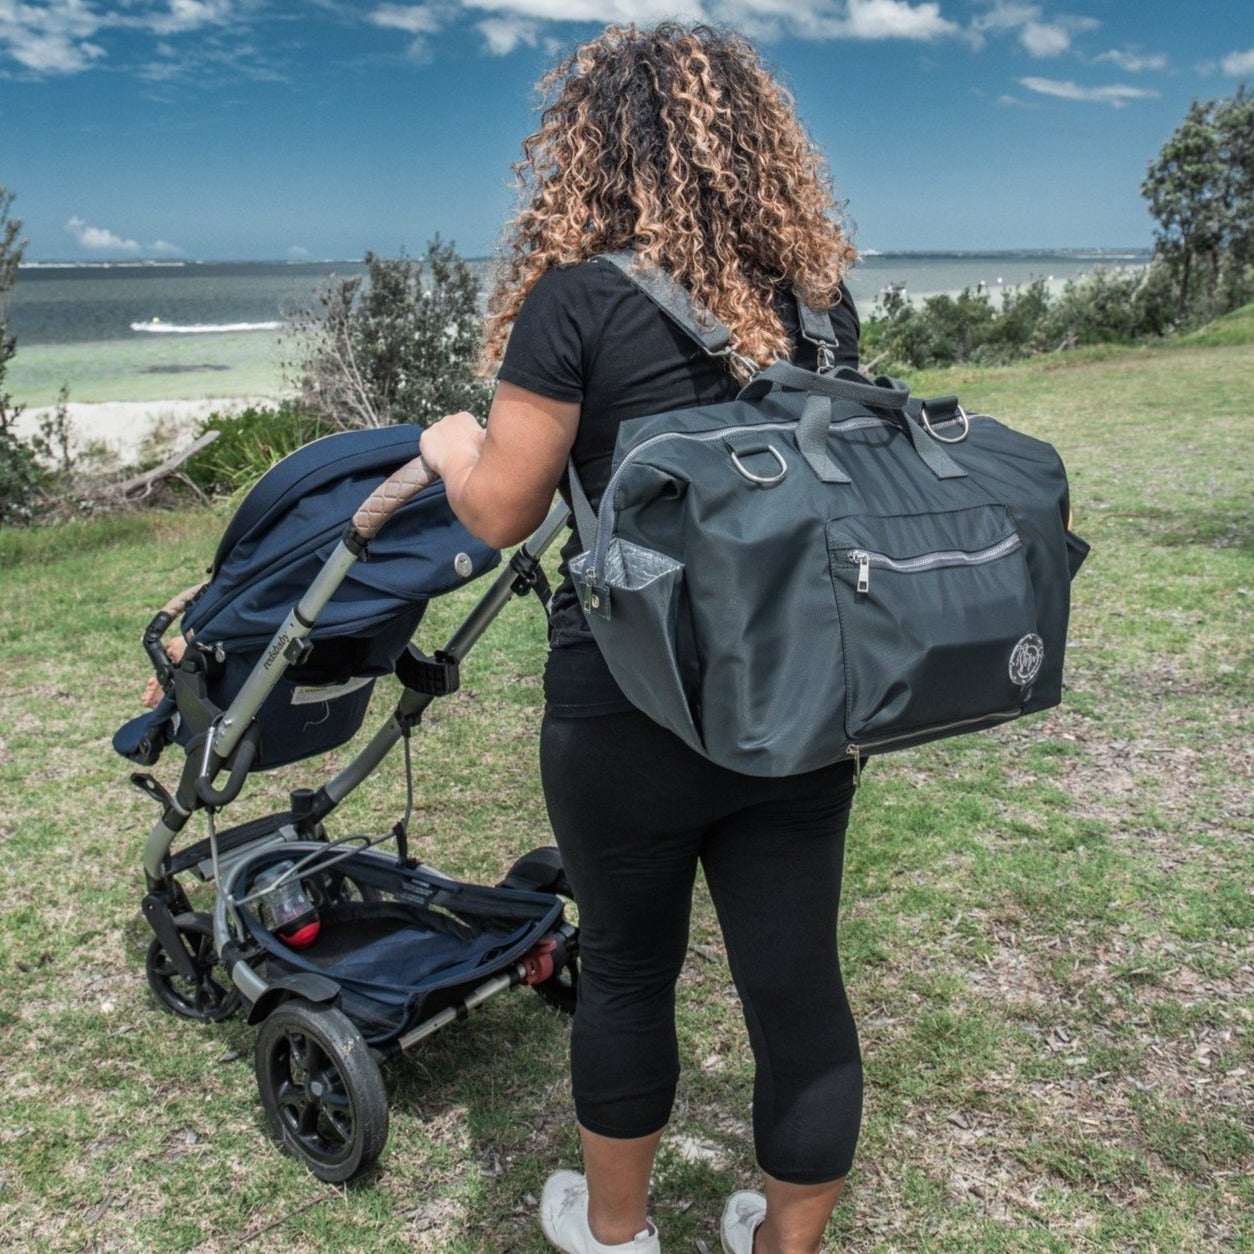 alt="Mum with pram wearing The DUFFLE Nappy Bag backpack"